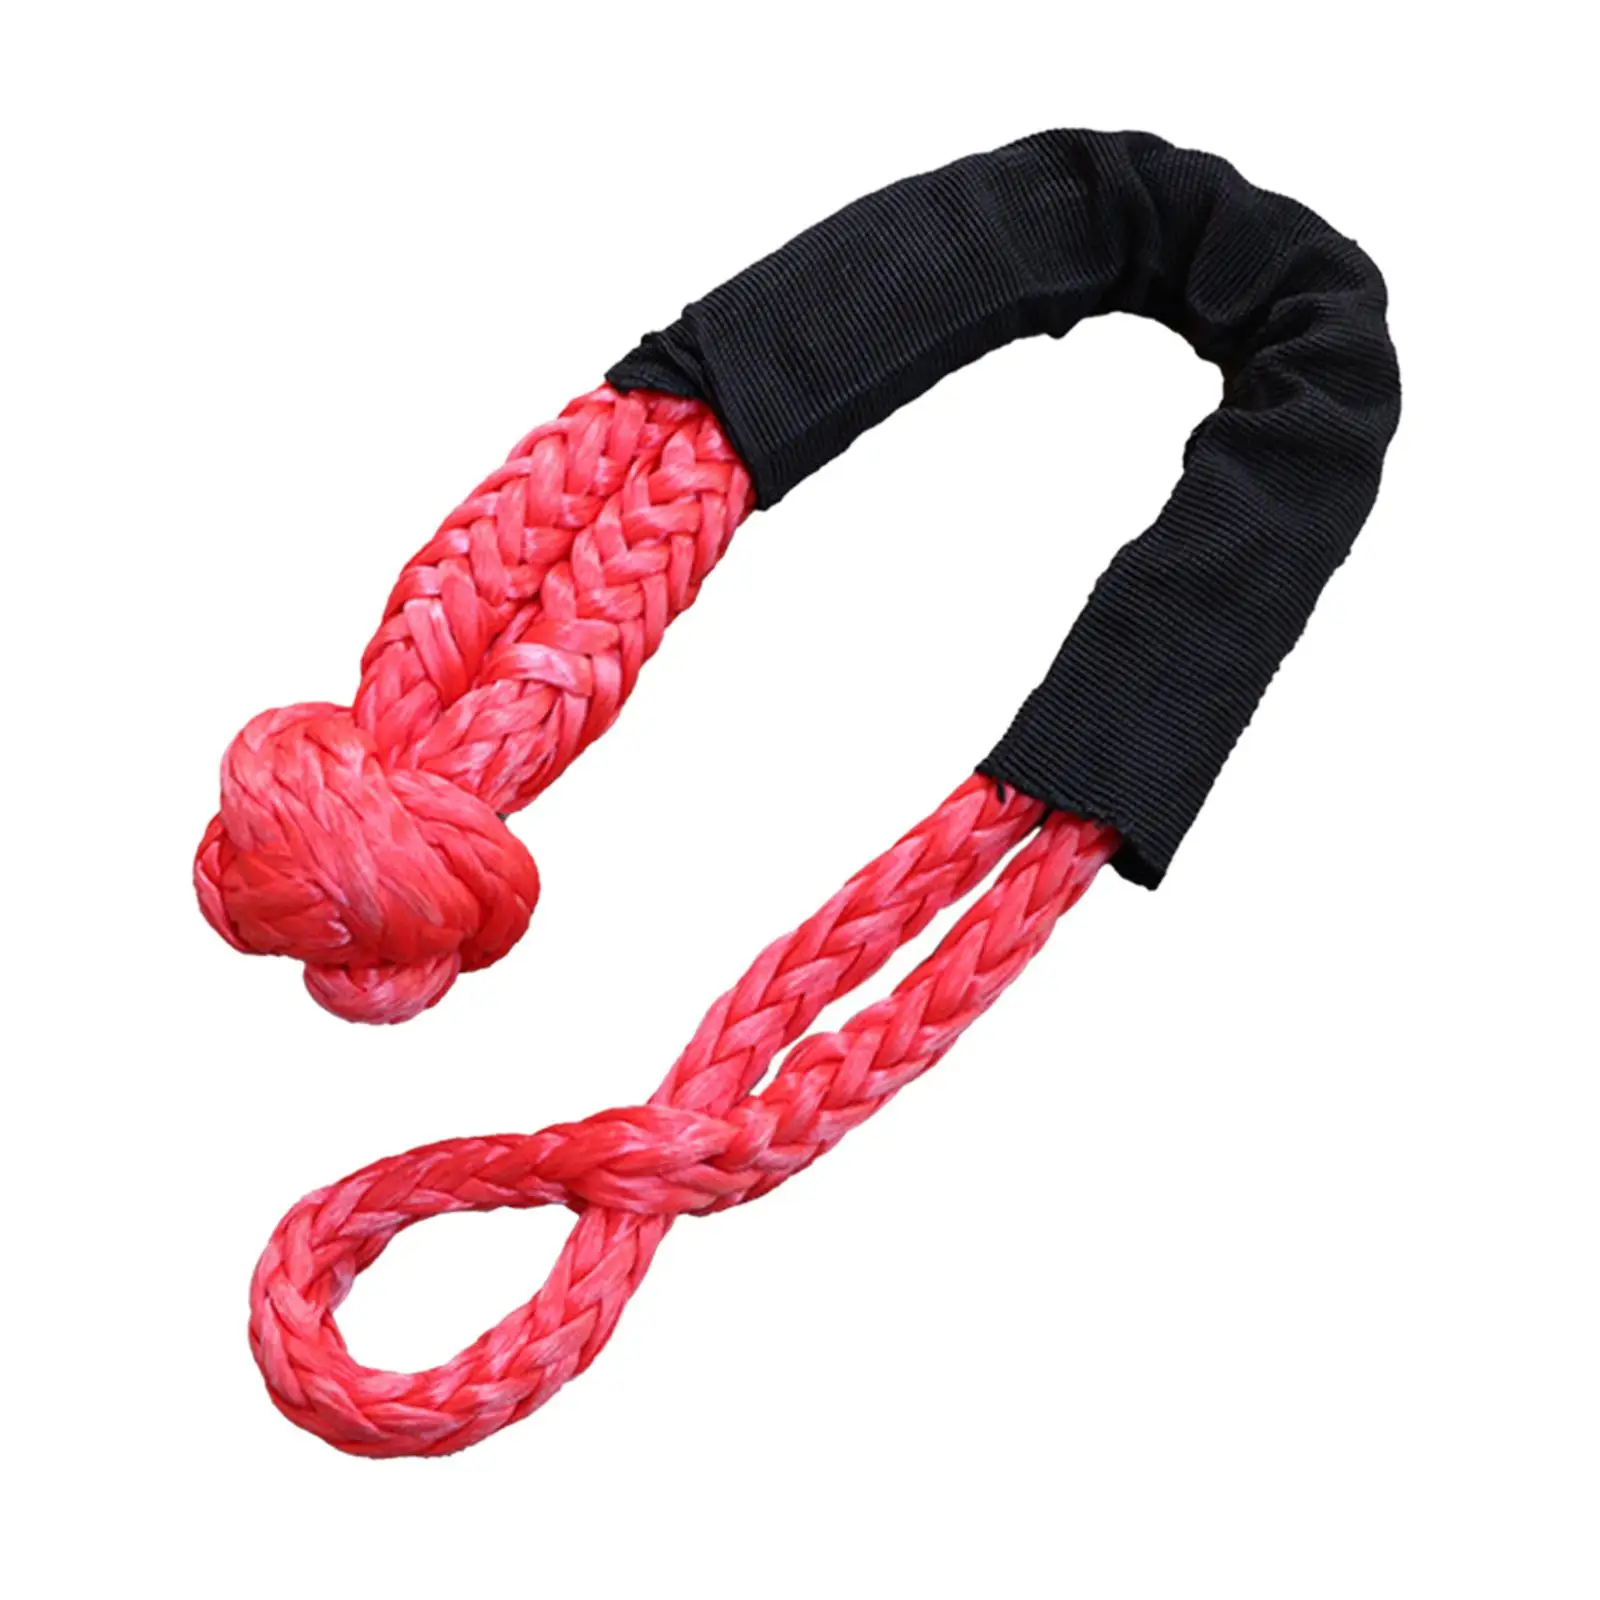 Soft Shackle Durable Protective Sleeve Towing Rope Strong Breaking Strength for ATV UTV SUV Towing Winches Sailing